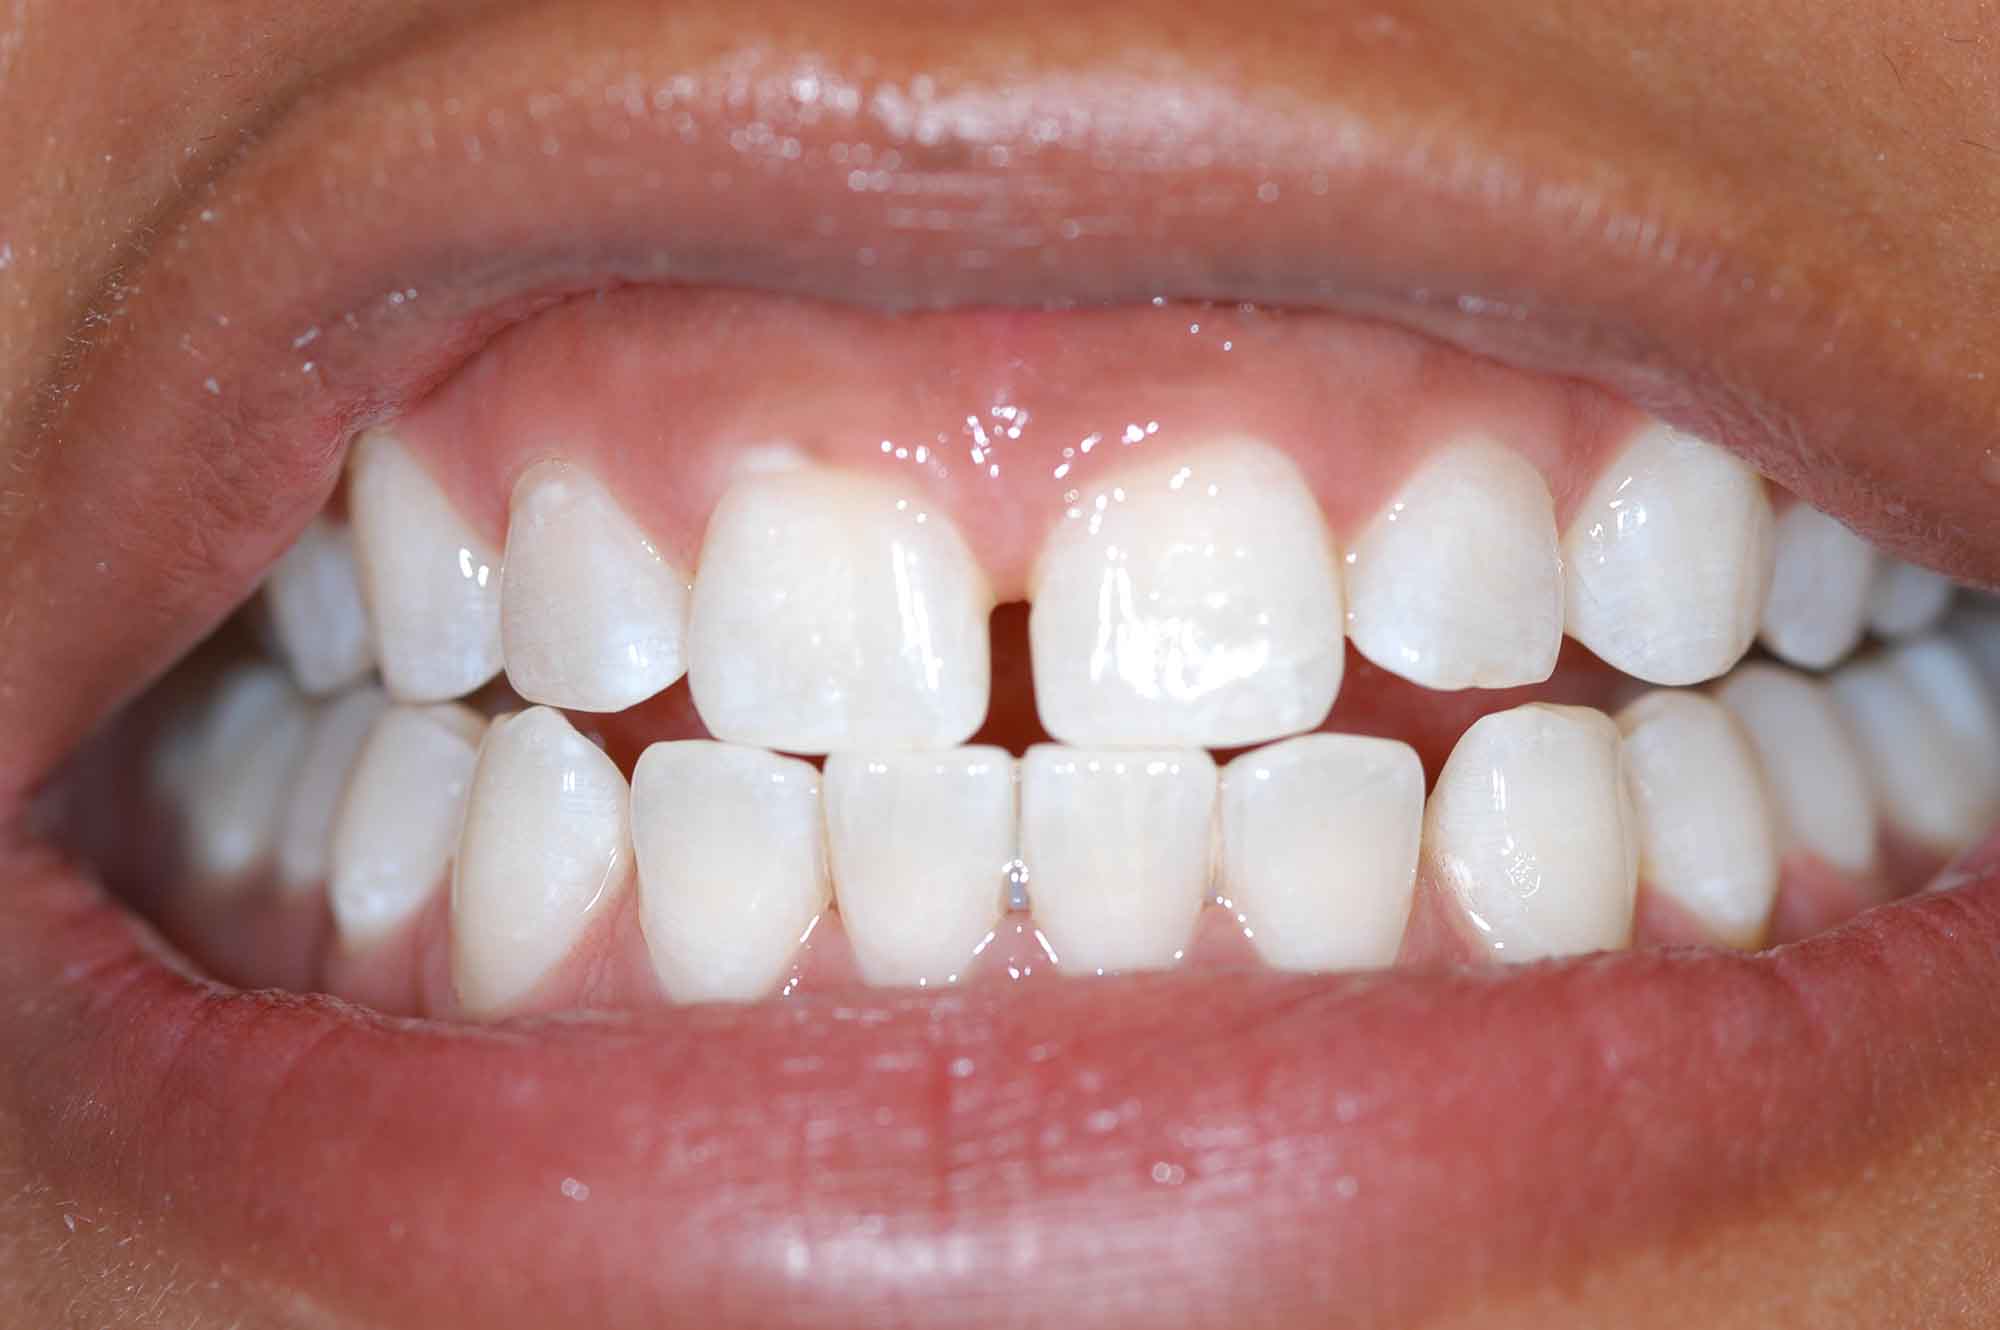 Second example after Whitening